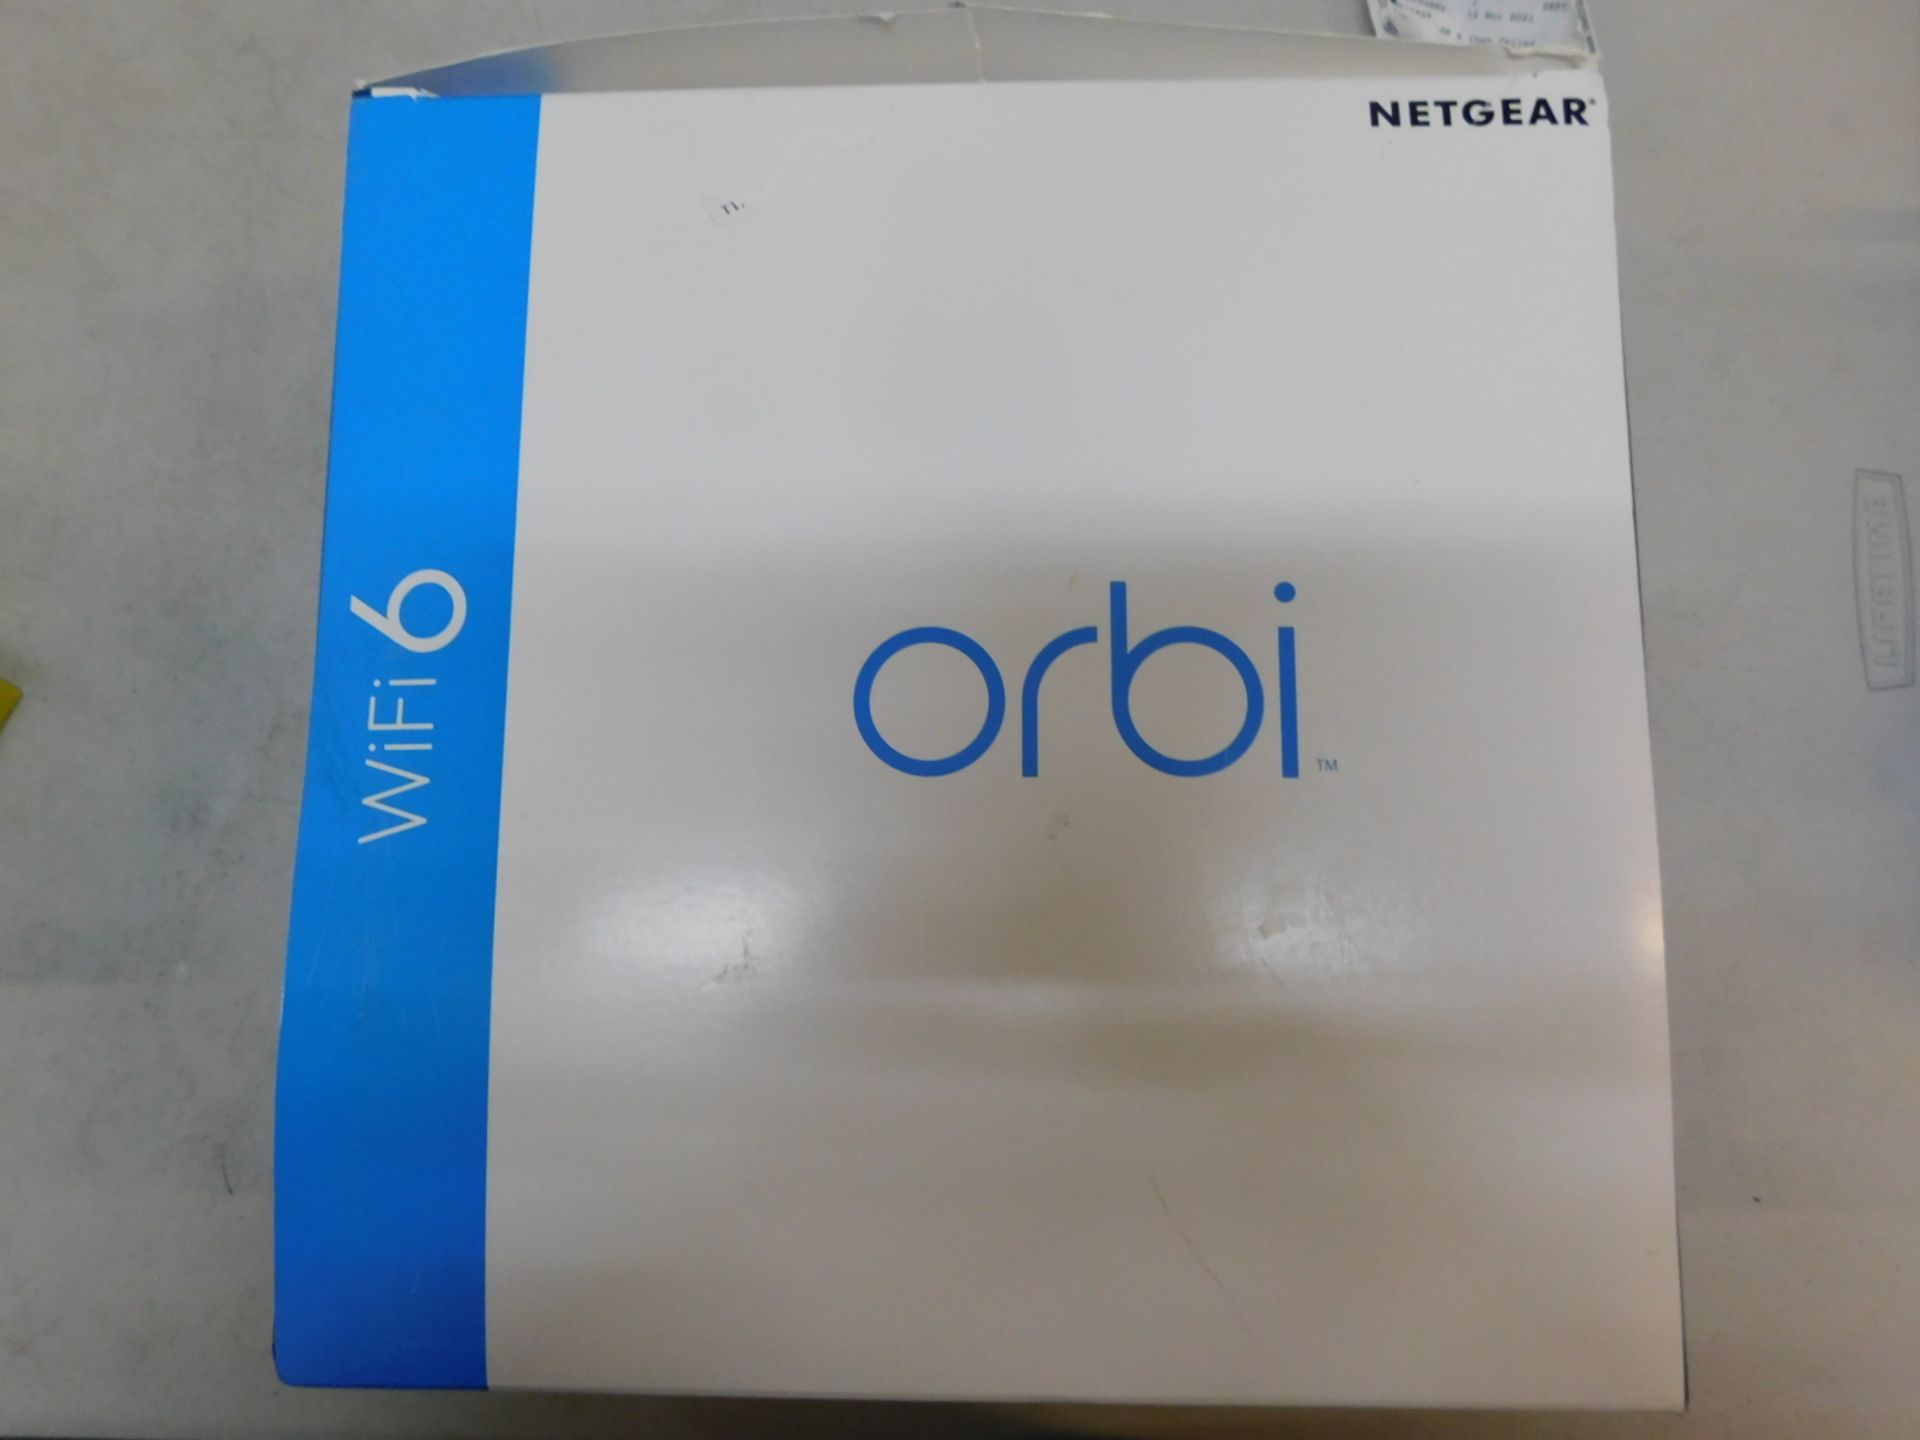 1 BOXED NETGEAR ORBI WHOLE HOME MESH WIFI SYSTEM MODEL AX1800 1 ROUTER AND 2 SATELITES RRP Â£499